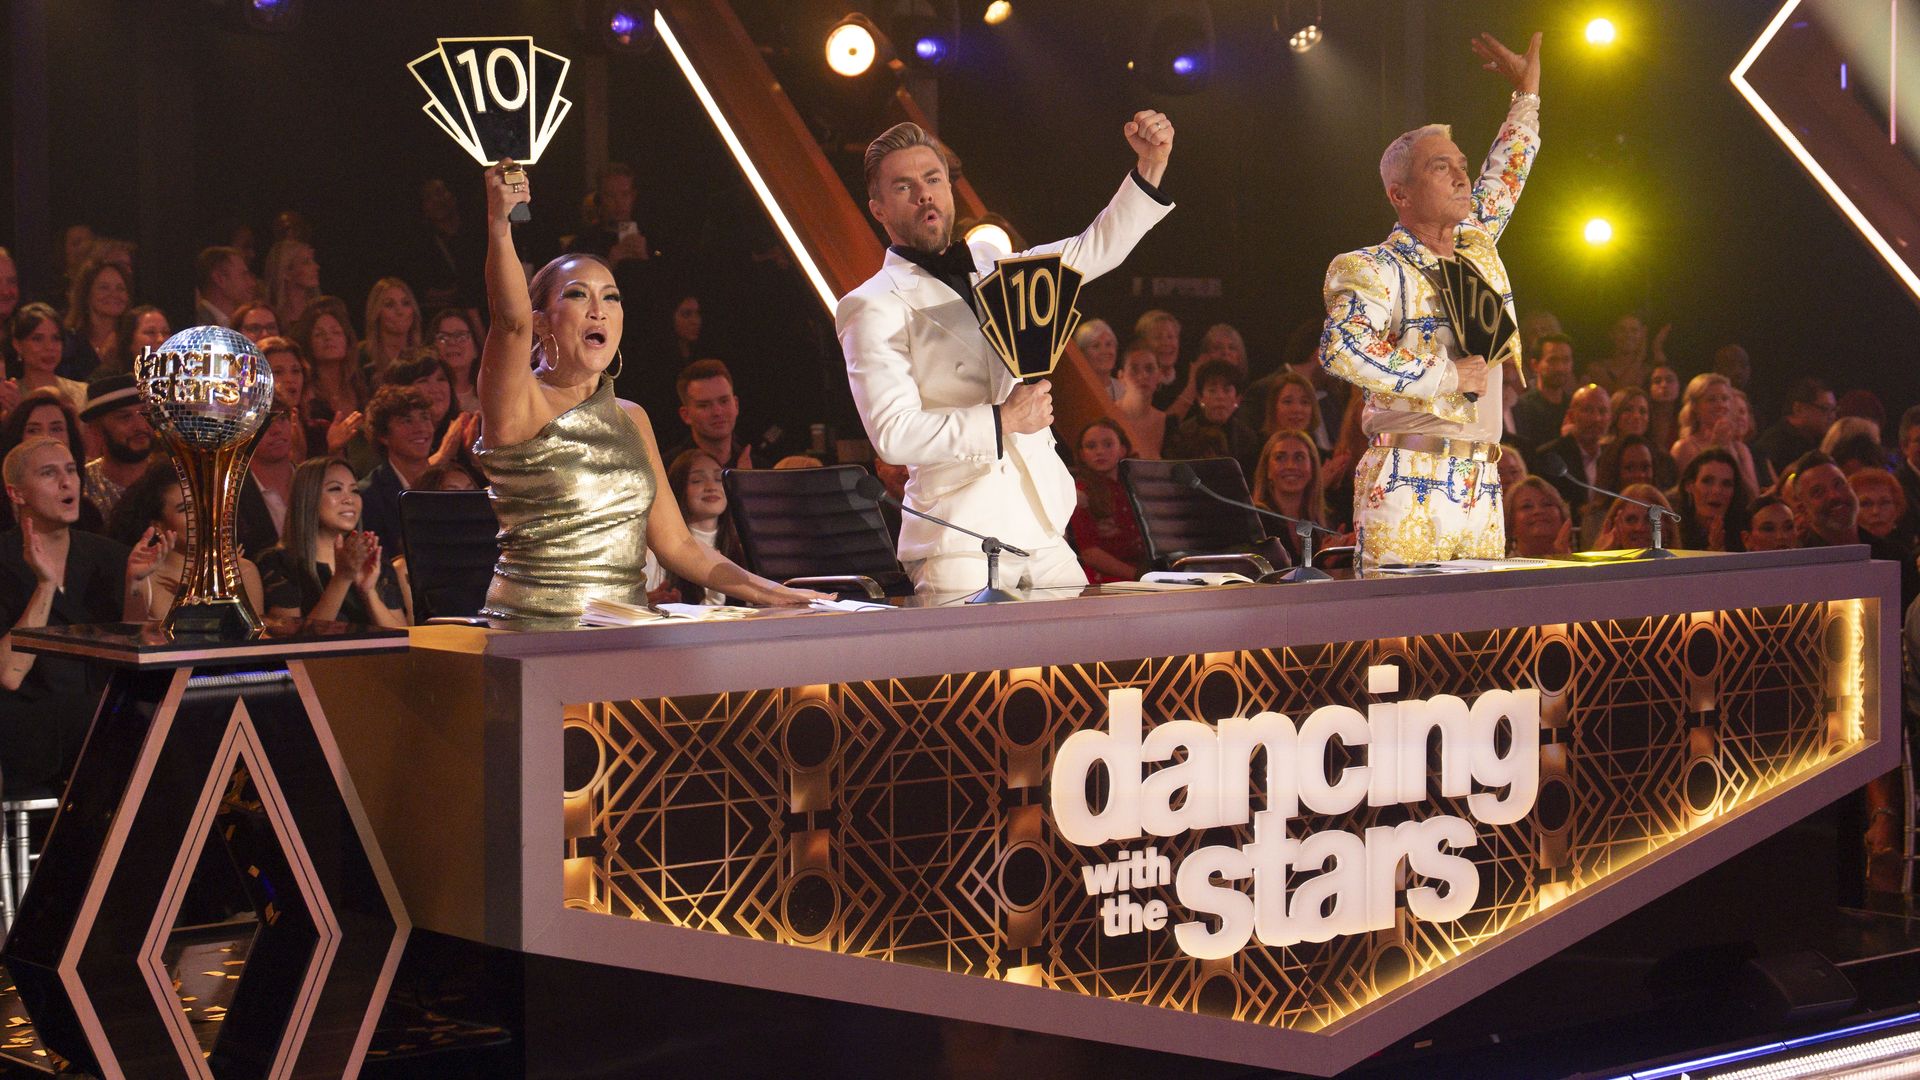 A shot of the judges from the TV show "Dancing With The Stars"